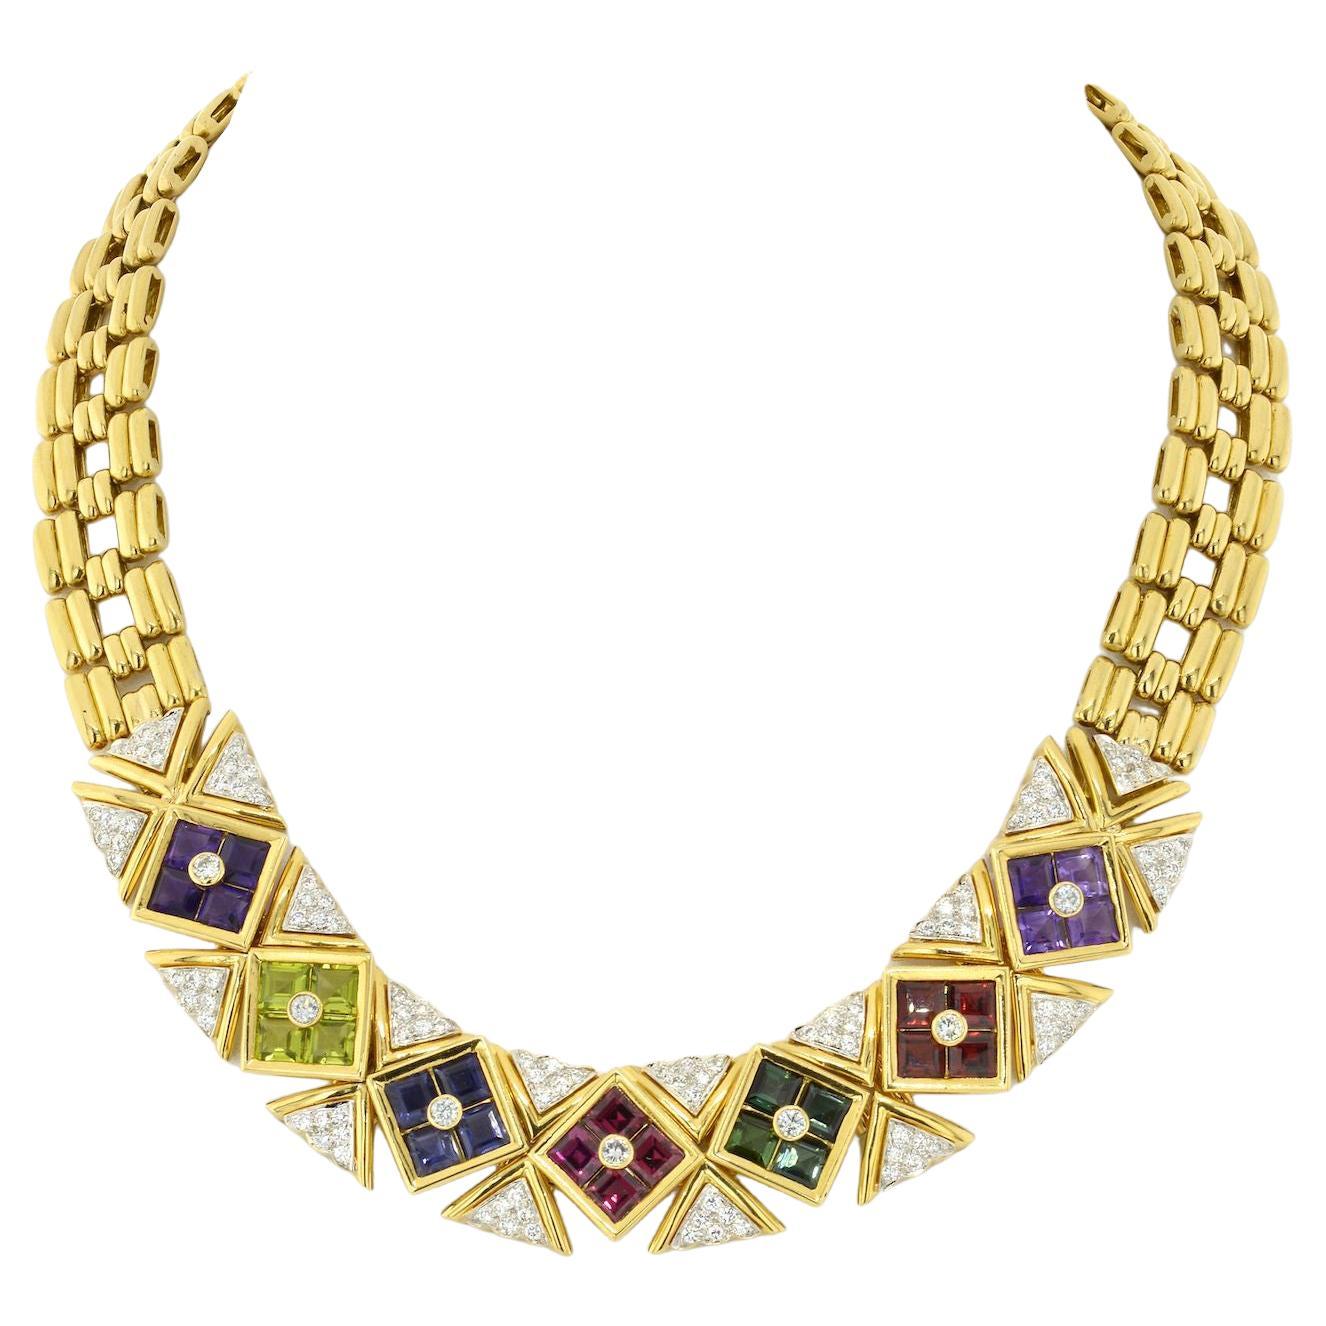 Paloma Picasso for Tiffany & Co. 18K Gold Multi-Gem Collar Ribbed Links Necklace